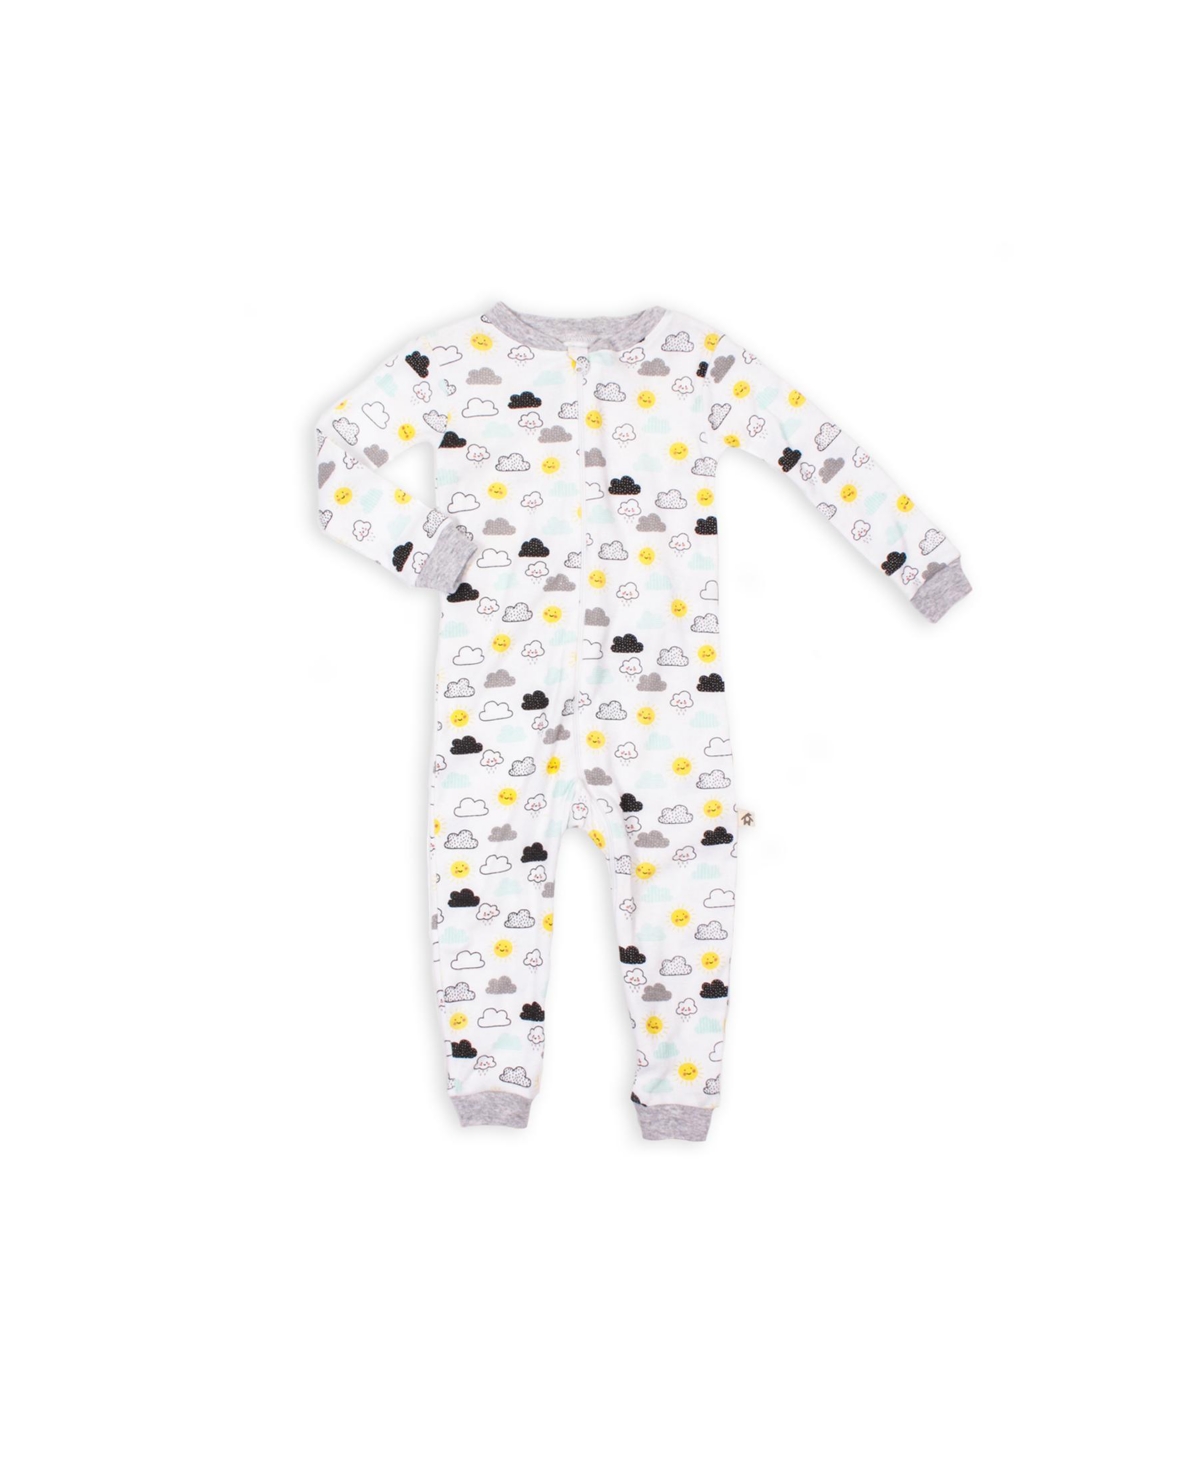 Shop Snugabye Baby Boys Or Baby Girls Holiday Footless Sleeper Coveralls In White